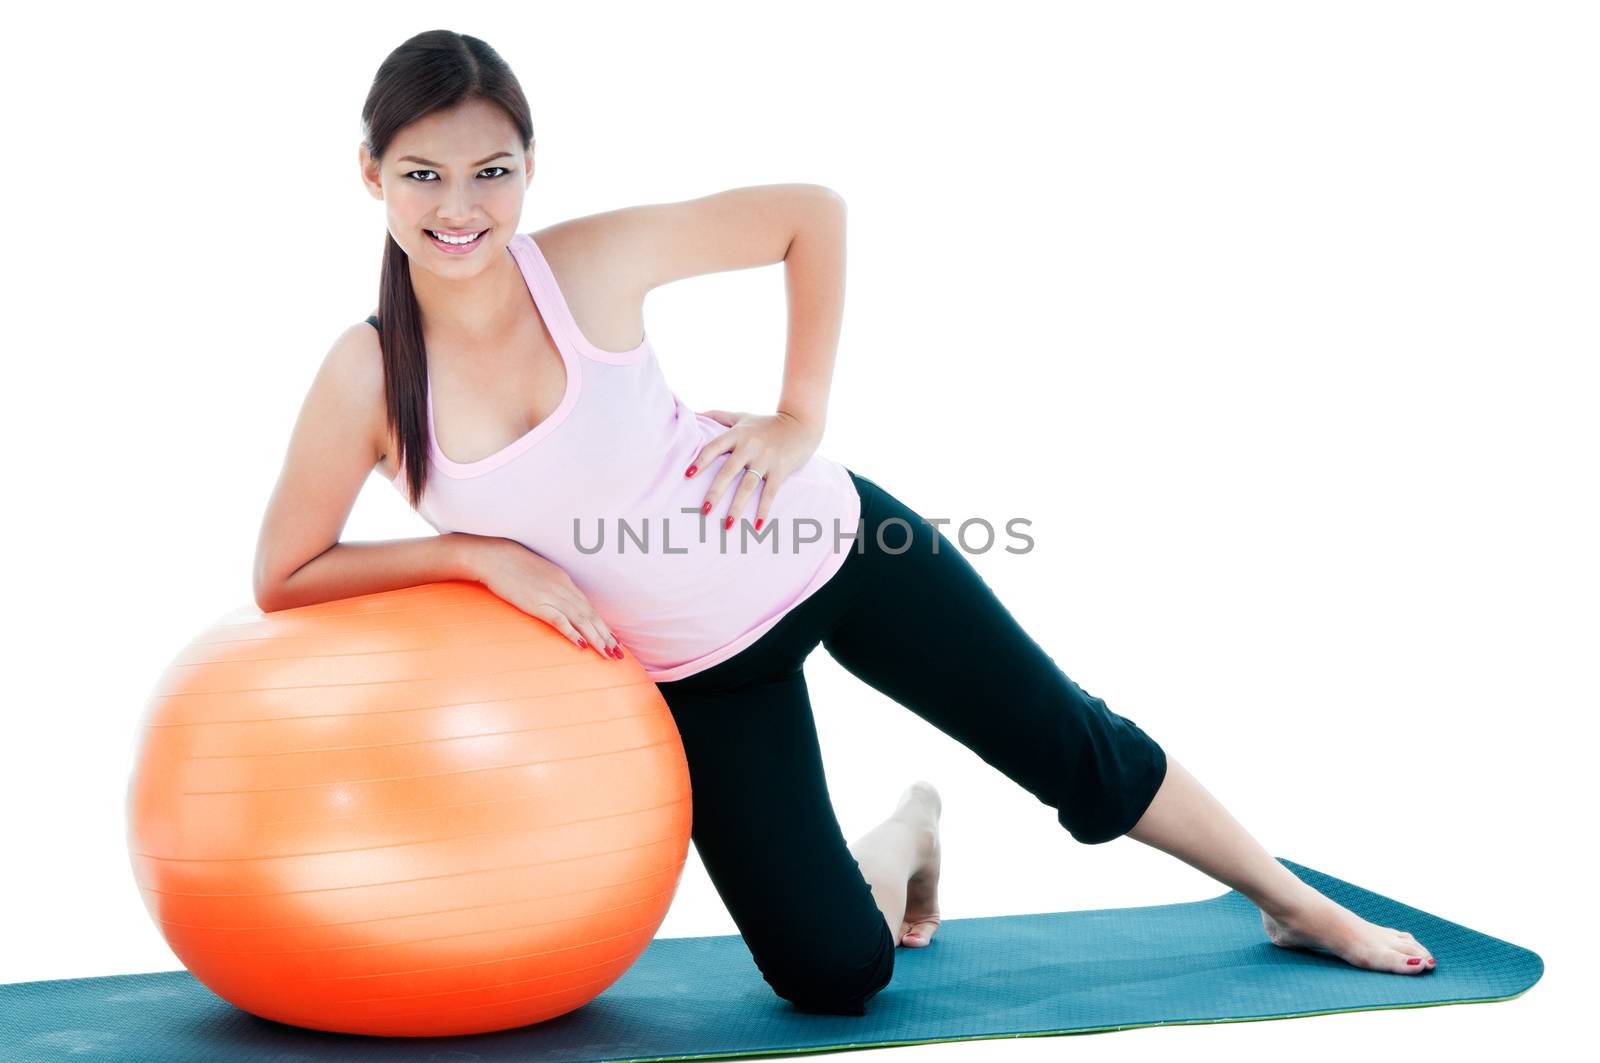 Portrait of pretty young woman doing exercise on balance ball.